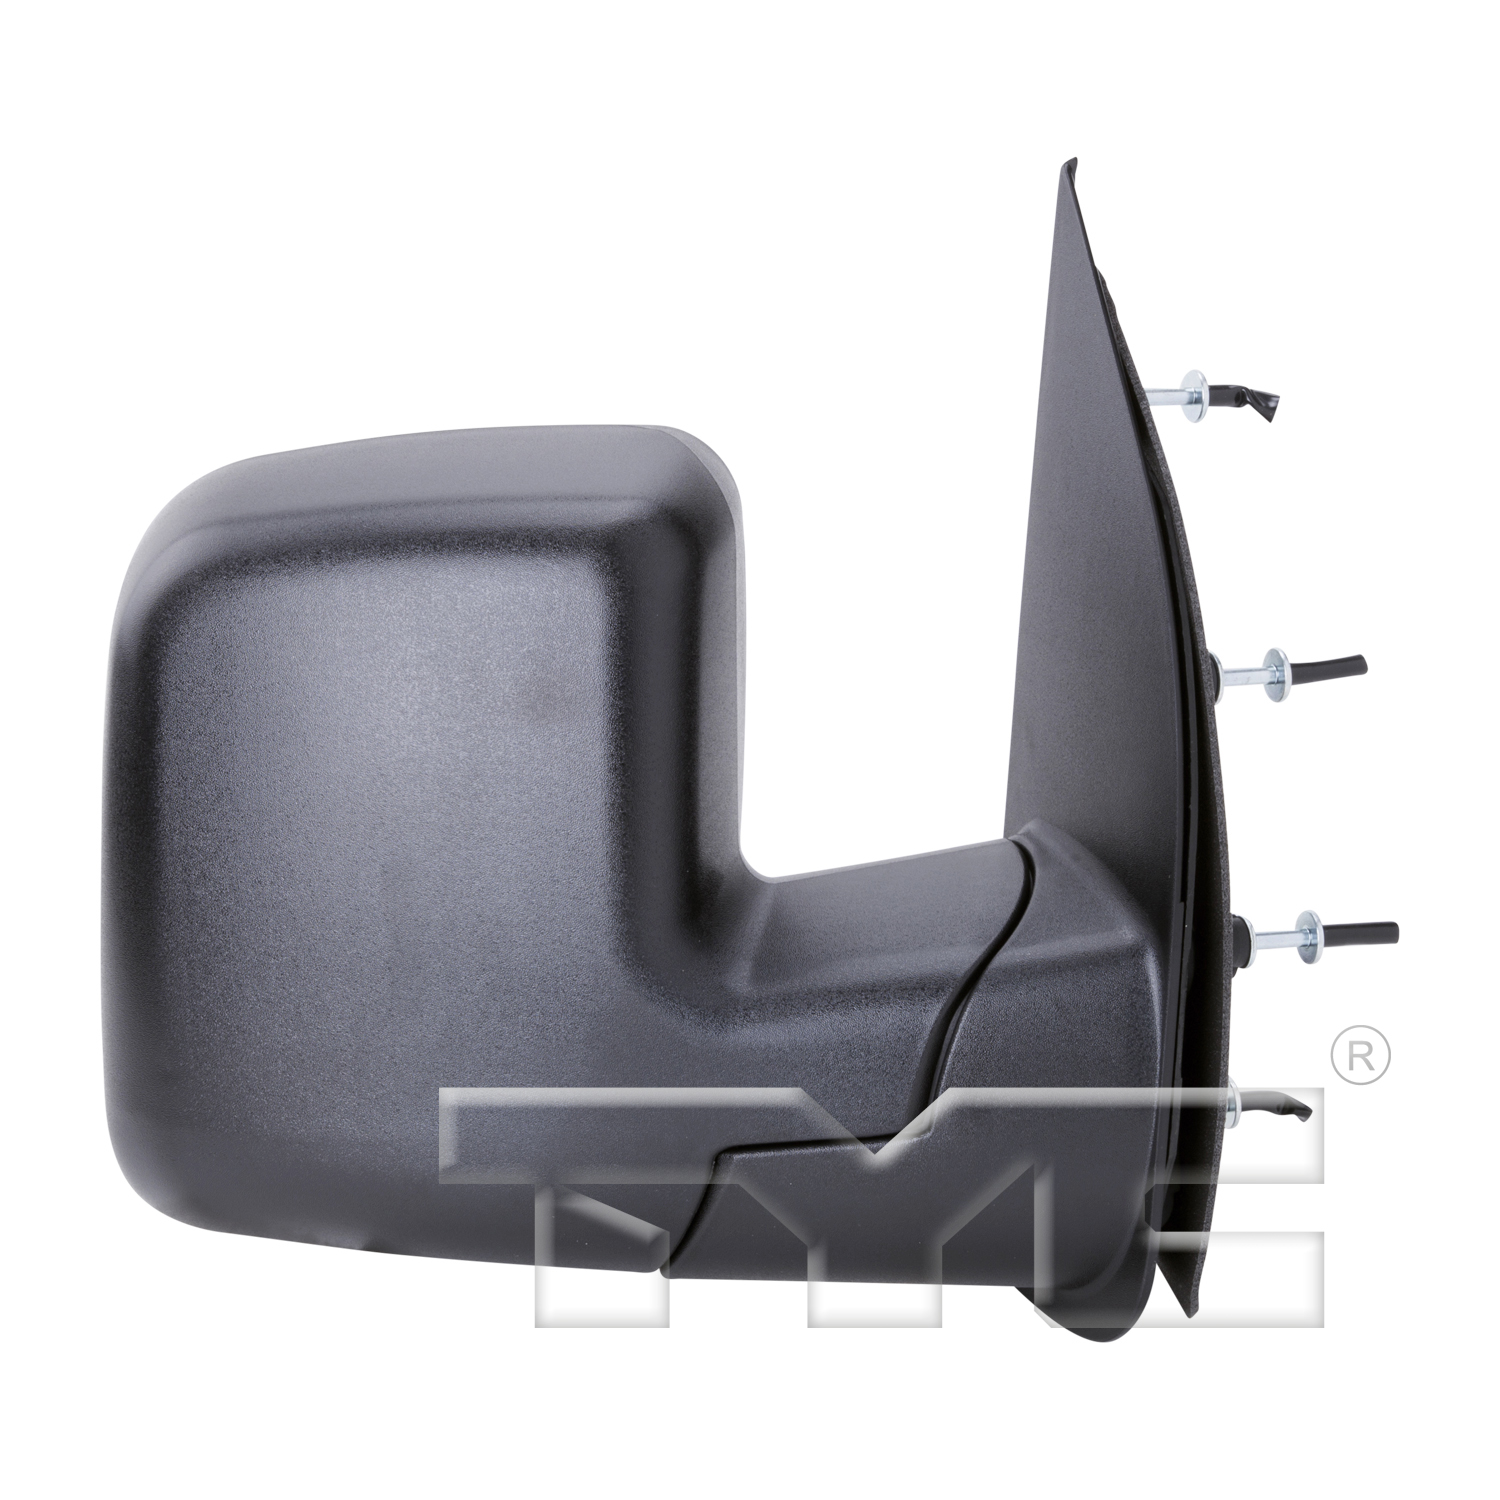 Aftermarket MIRRORS for FORD - E-550 SUPER DUTY, E-550 SUPER DUTY,03-03,RT Mirror outside rear view